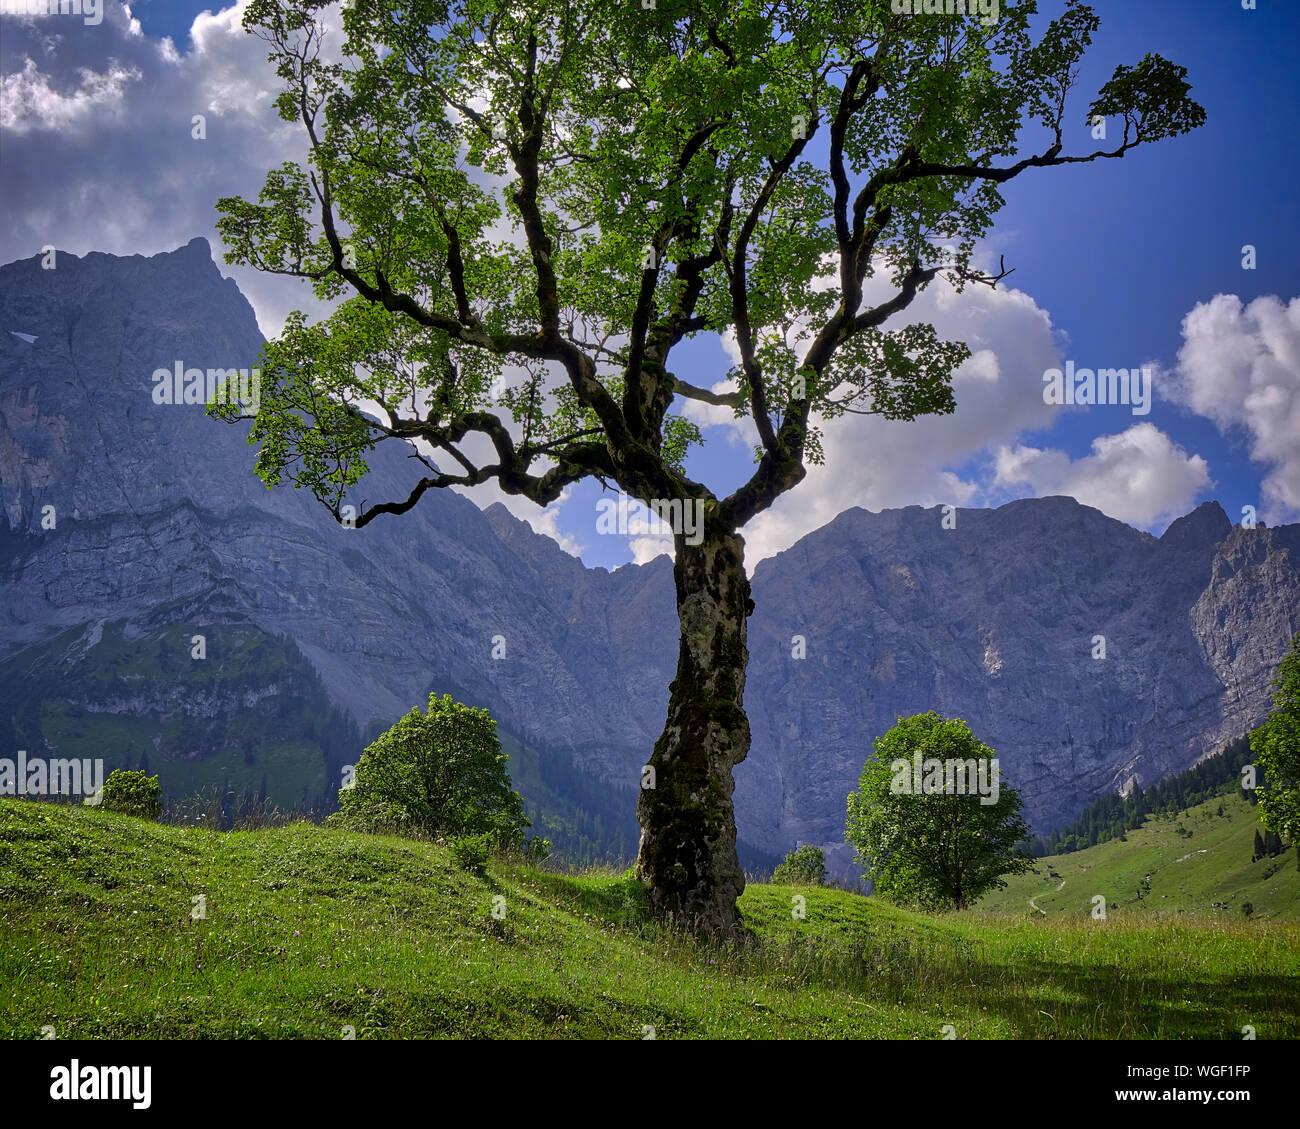 AT - TYROL: Lone Acer Tree at Grosser Ahornboden and Lamsenspitze Mountain Stock Photo